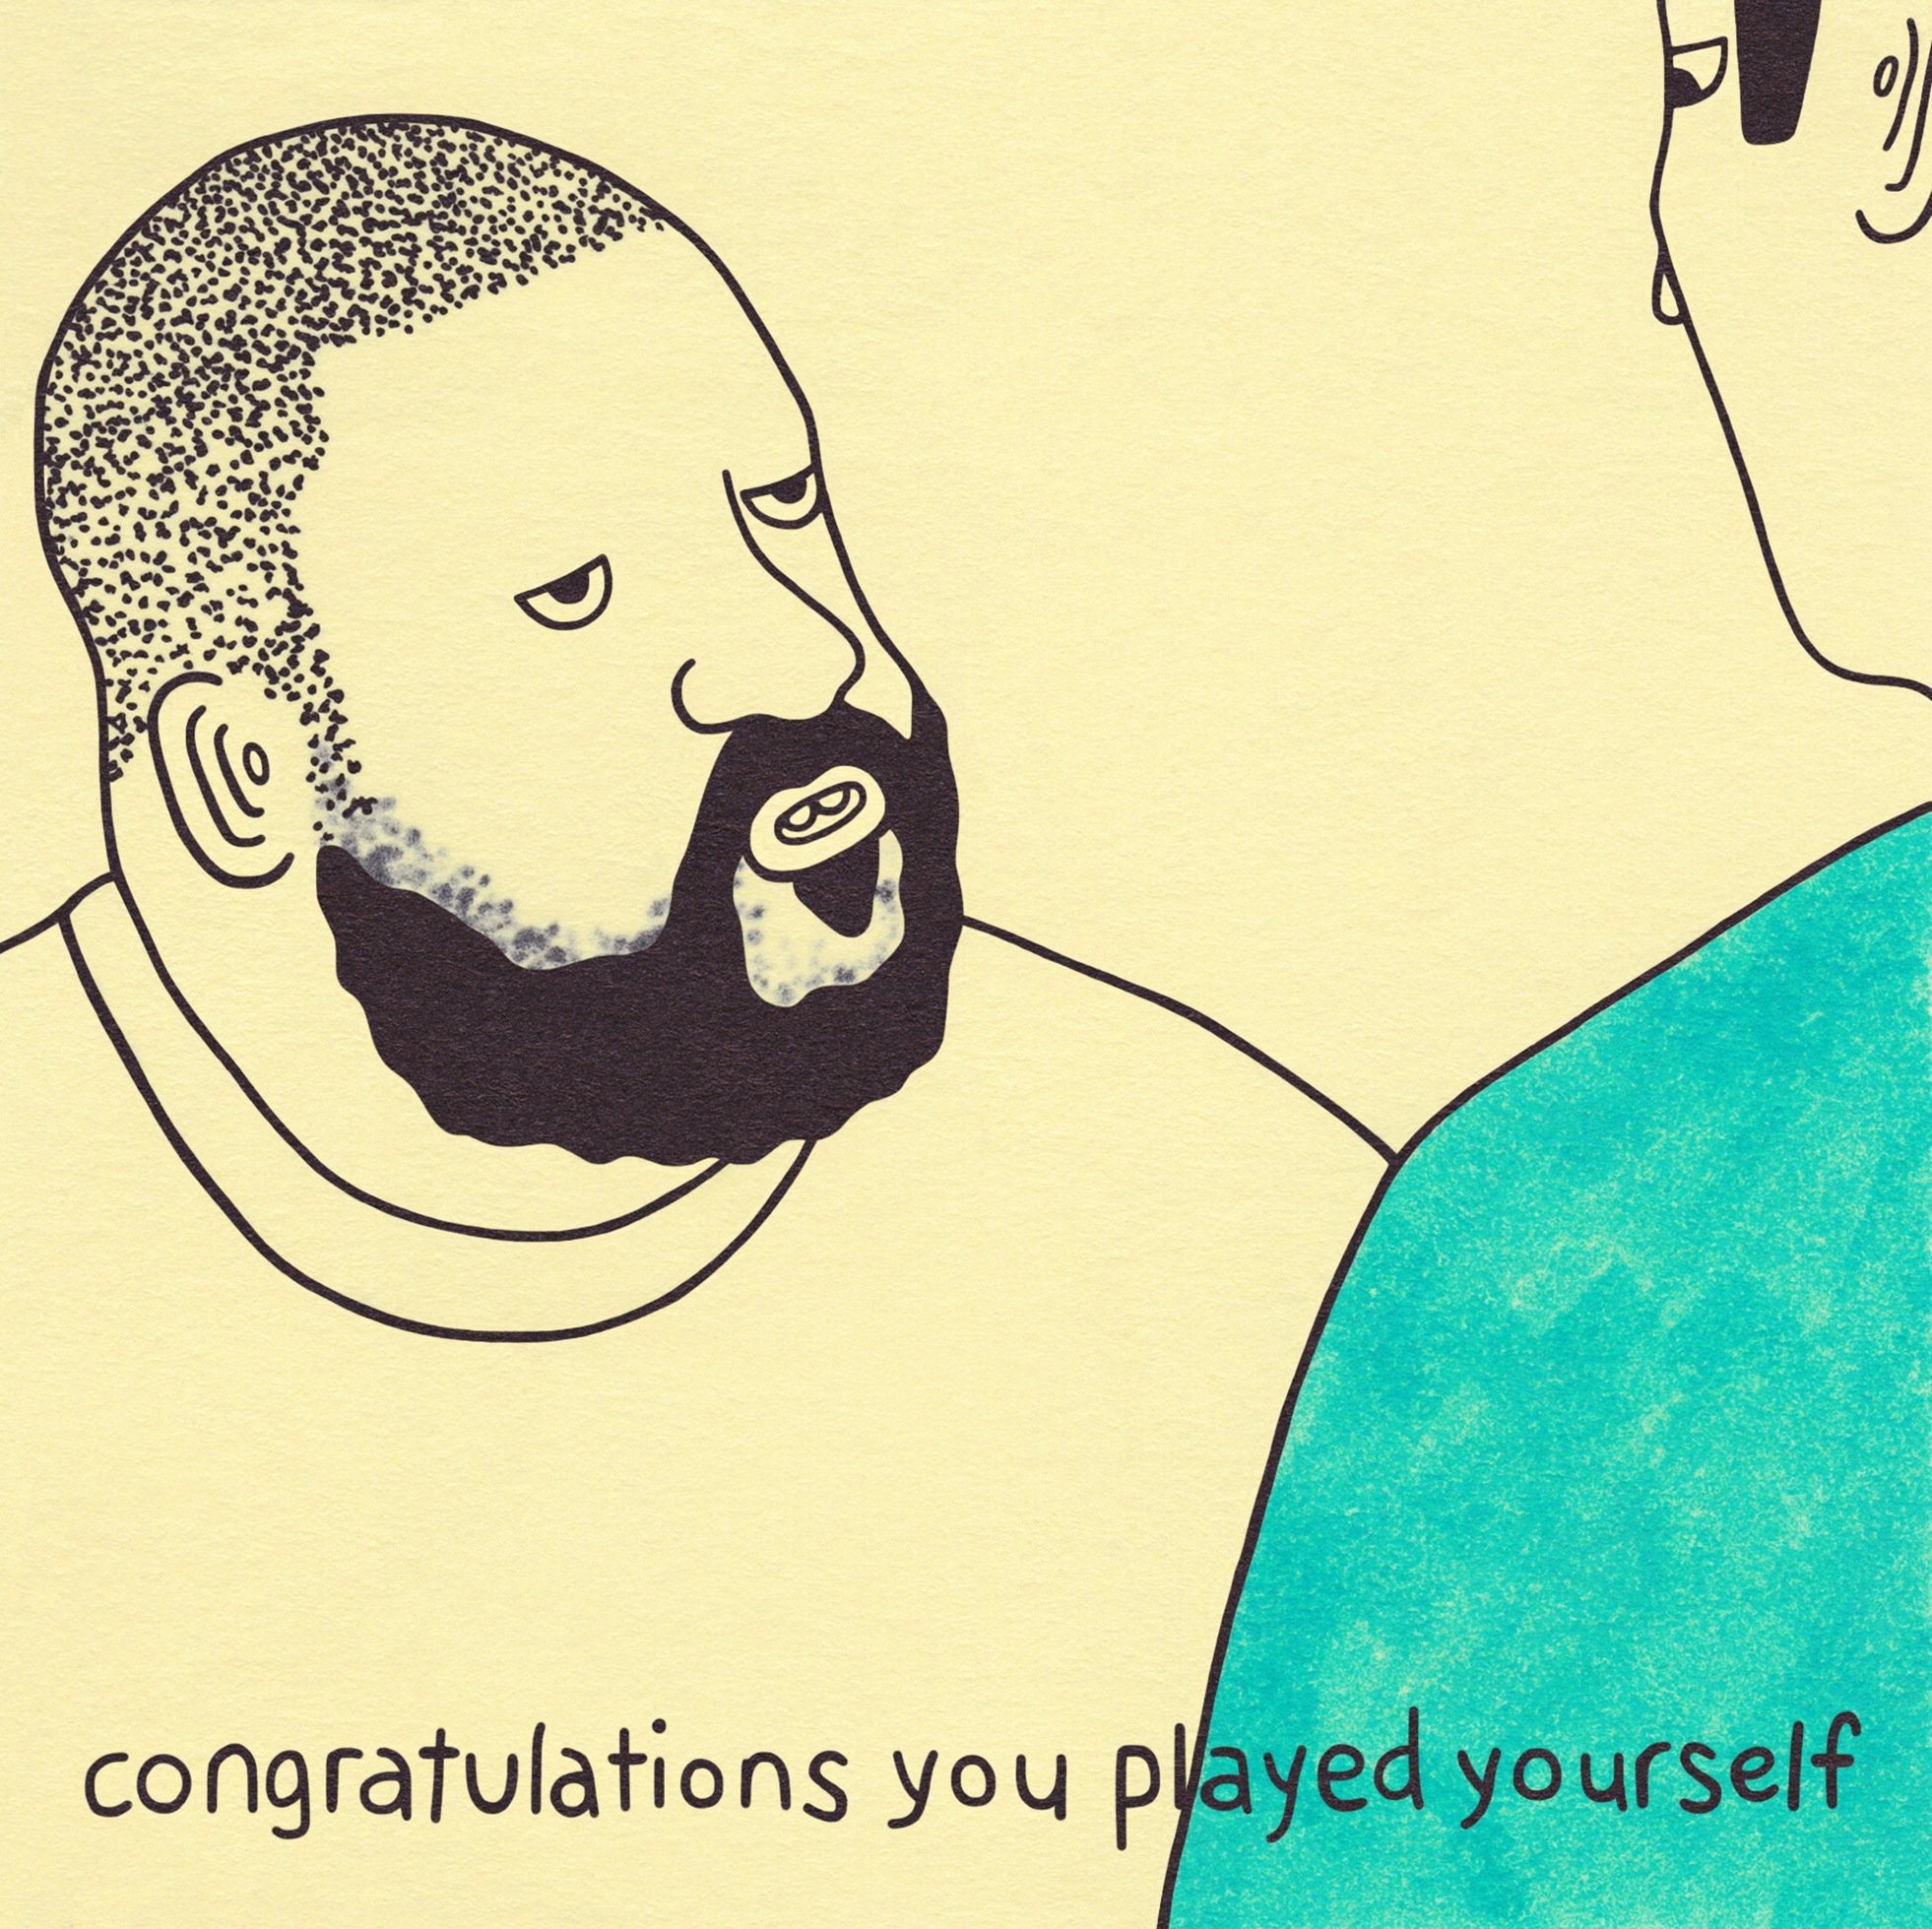 GANGSTER DOODLES on X: DJ Khaled - Don't Ever Play Yourself